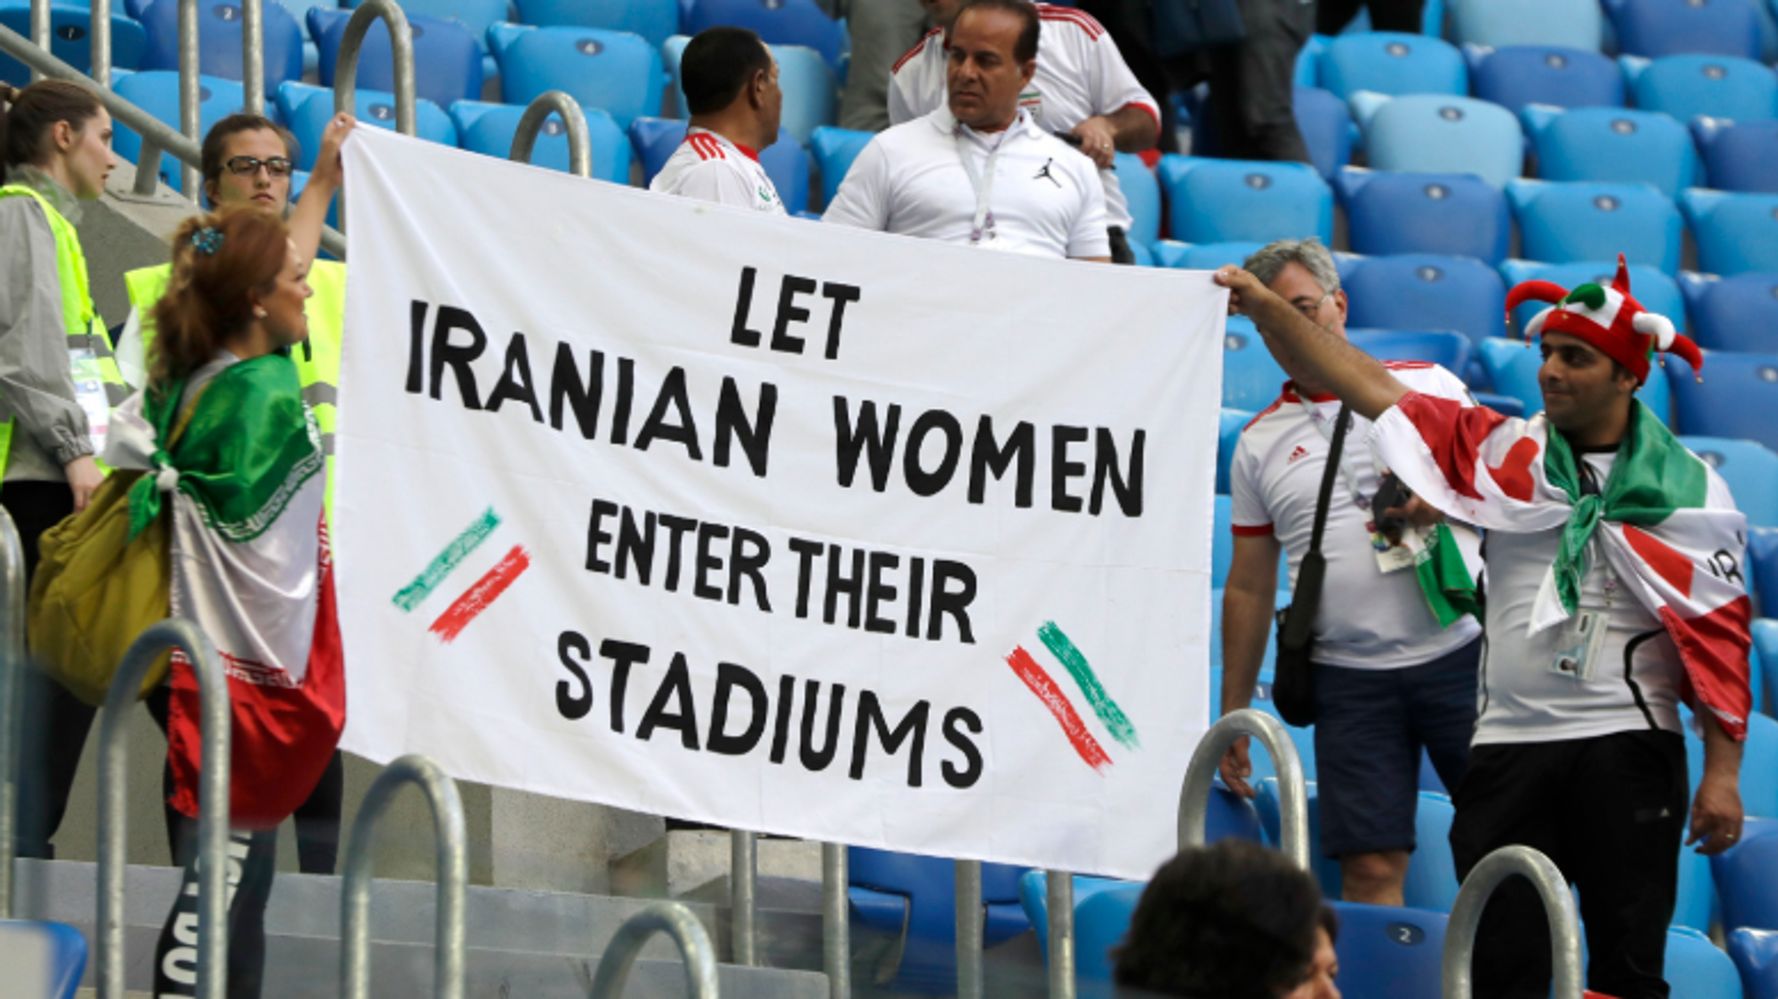 Iran Fans Stage World Cup Protest Over Ban On Women At Football Games